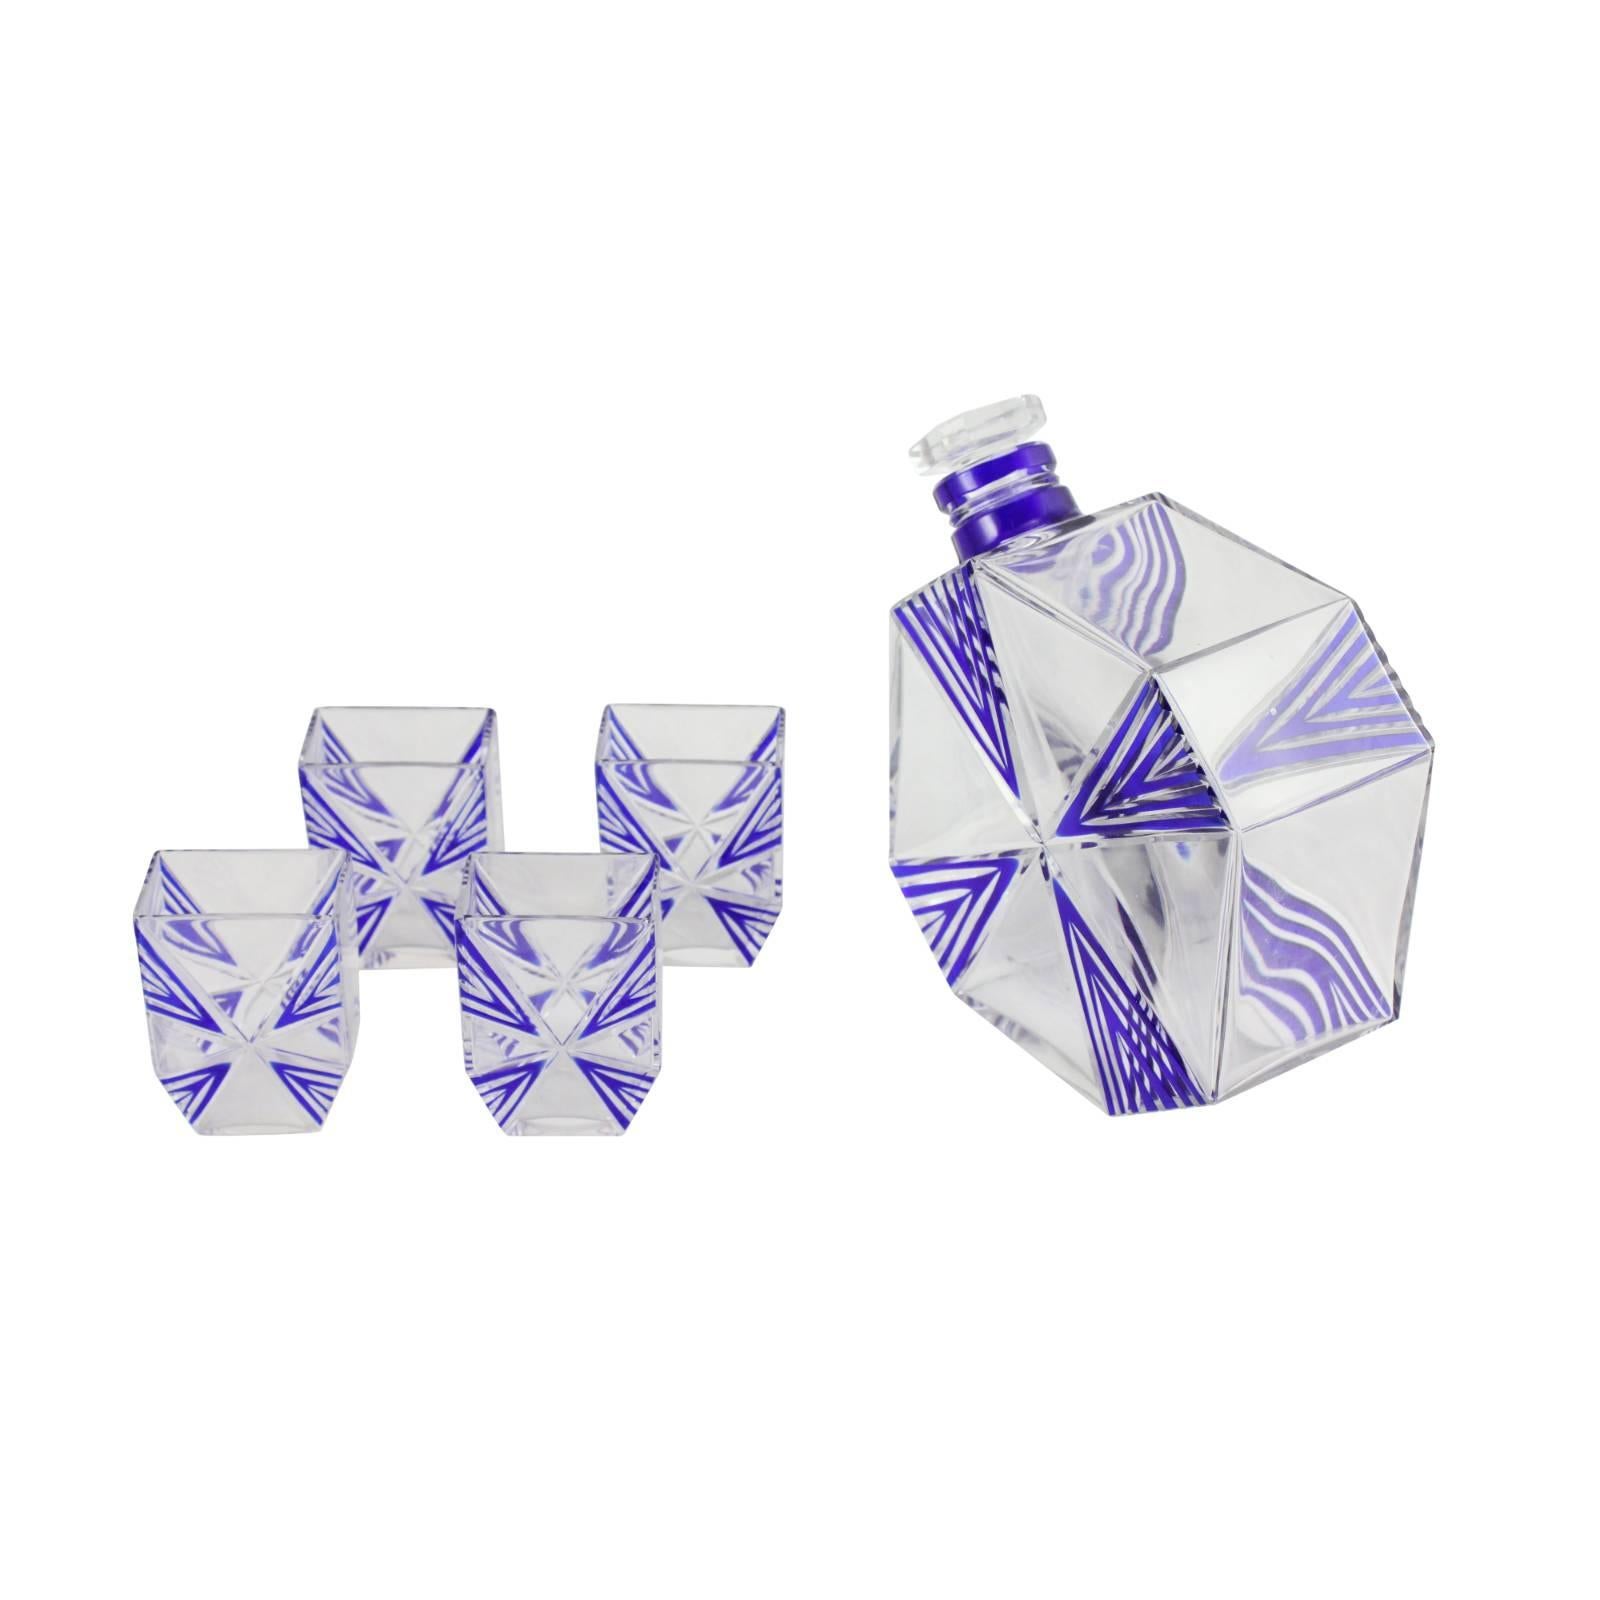 Mid-20th Century Art Deco Clear Crystal and Blue Decanter and Four Shot Glasses by Karl Palda For Sale